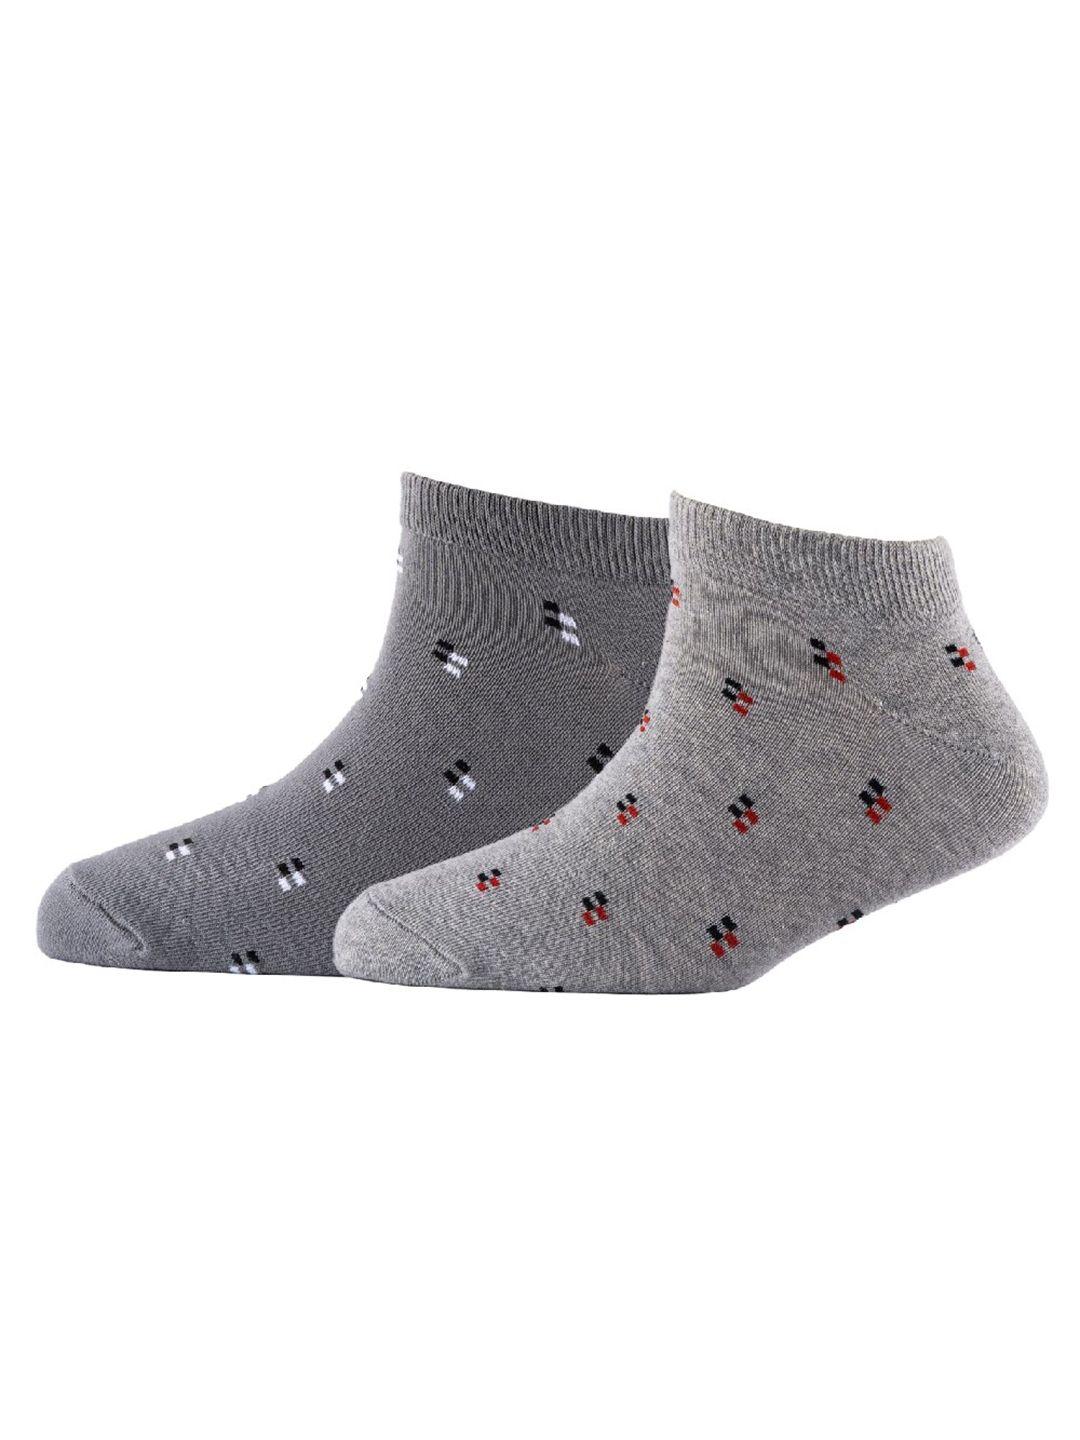 cotstyle men pack of 2 patterned cotton ankle length socks